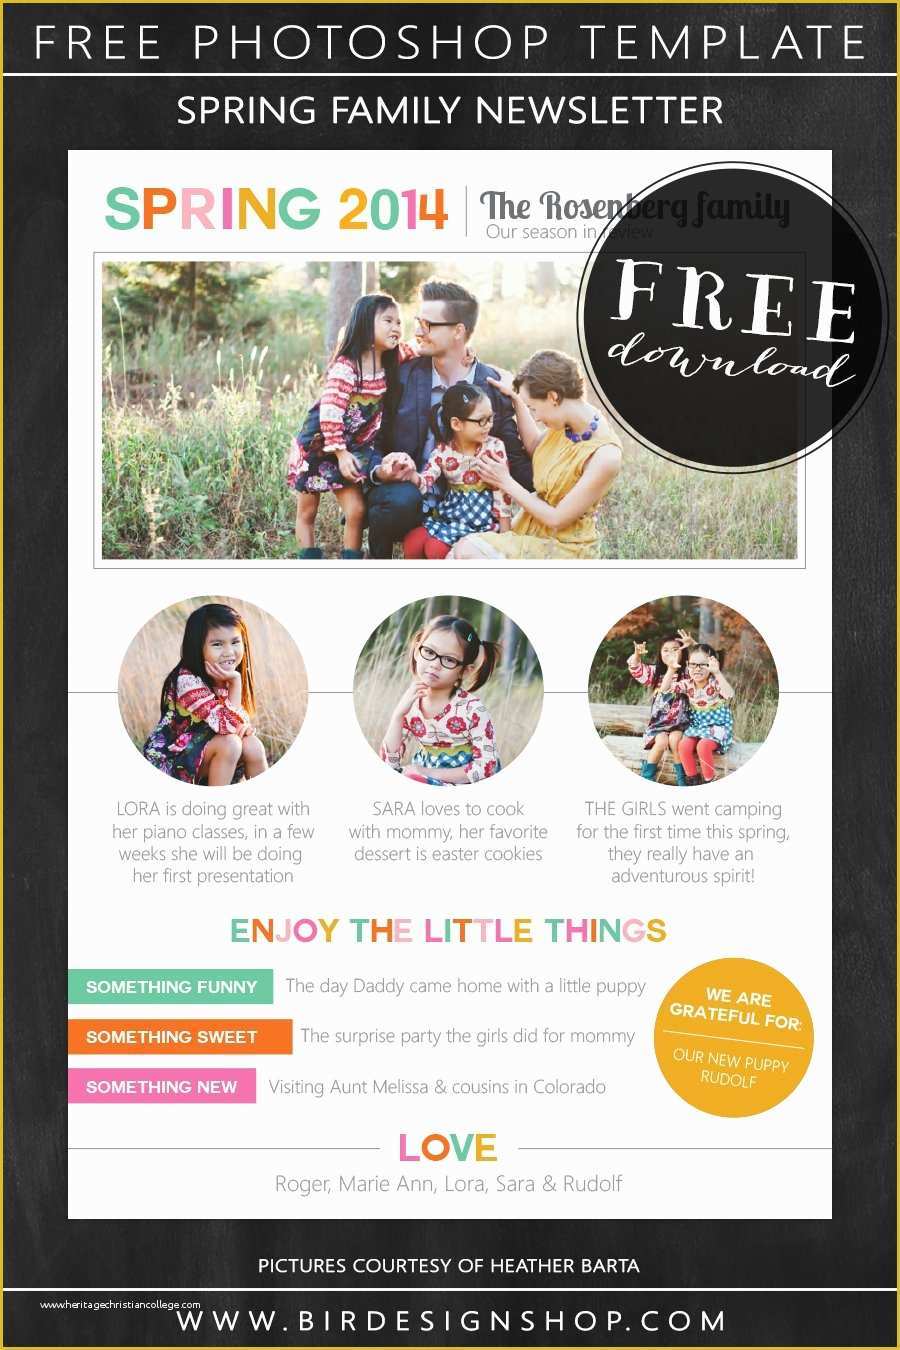 Family Christmas Newsletter Template Free Of Spring Family Newsletter Free Photoshop Template – Birdesign